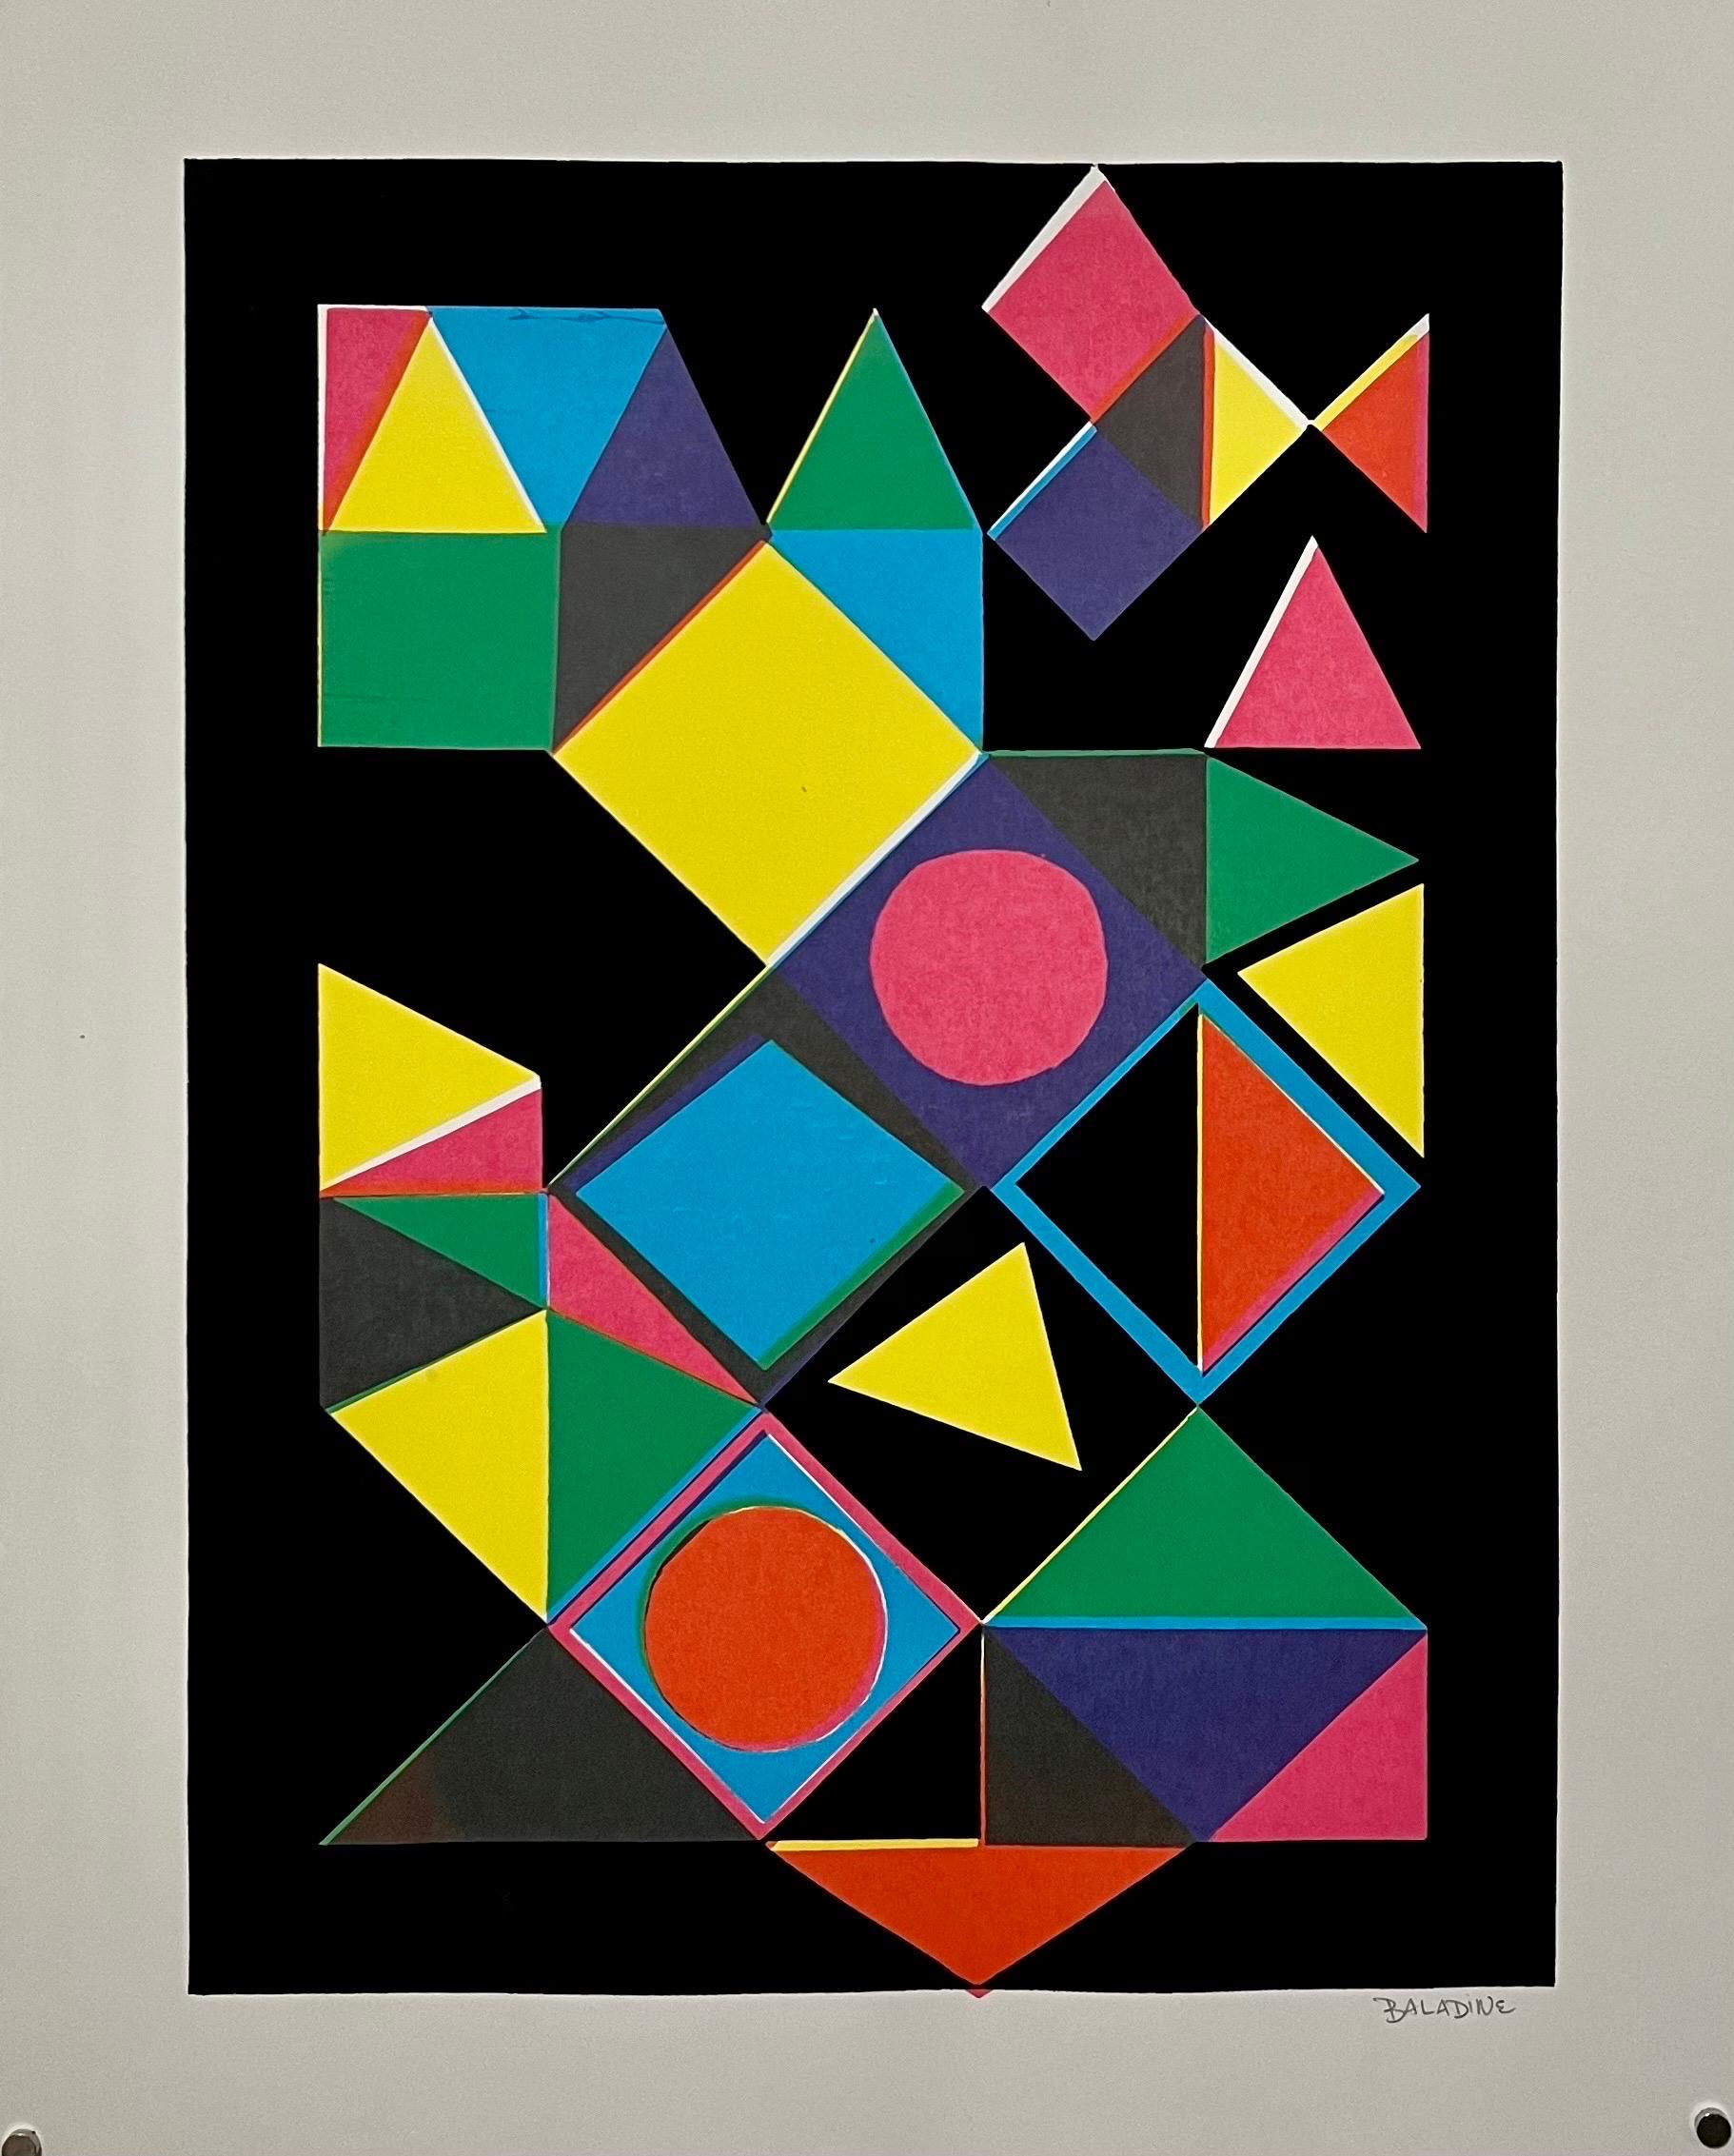 
This is hand signed in pencil. It is not numbered.
This appears to be a silkscreen or serigraph or a multi stone lithograph. It is a great hard edged, geometric, vibrant mid century mod piece done in an almost fluorescent neon color. 
This is Op